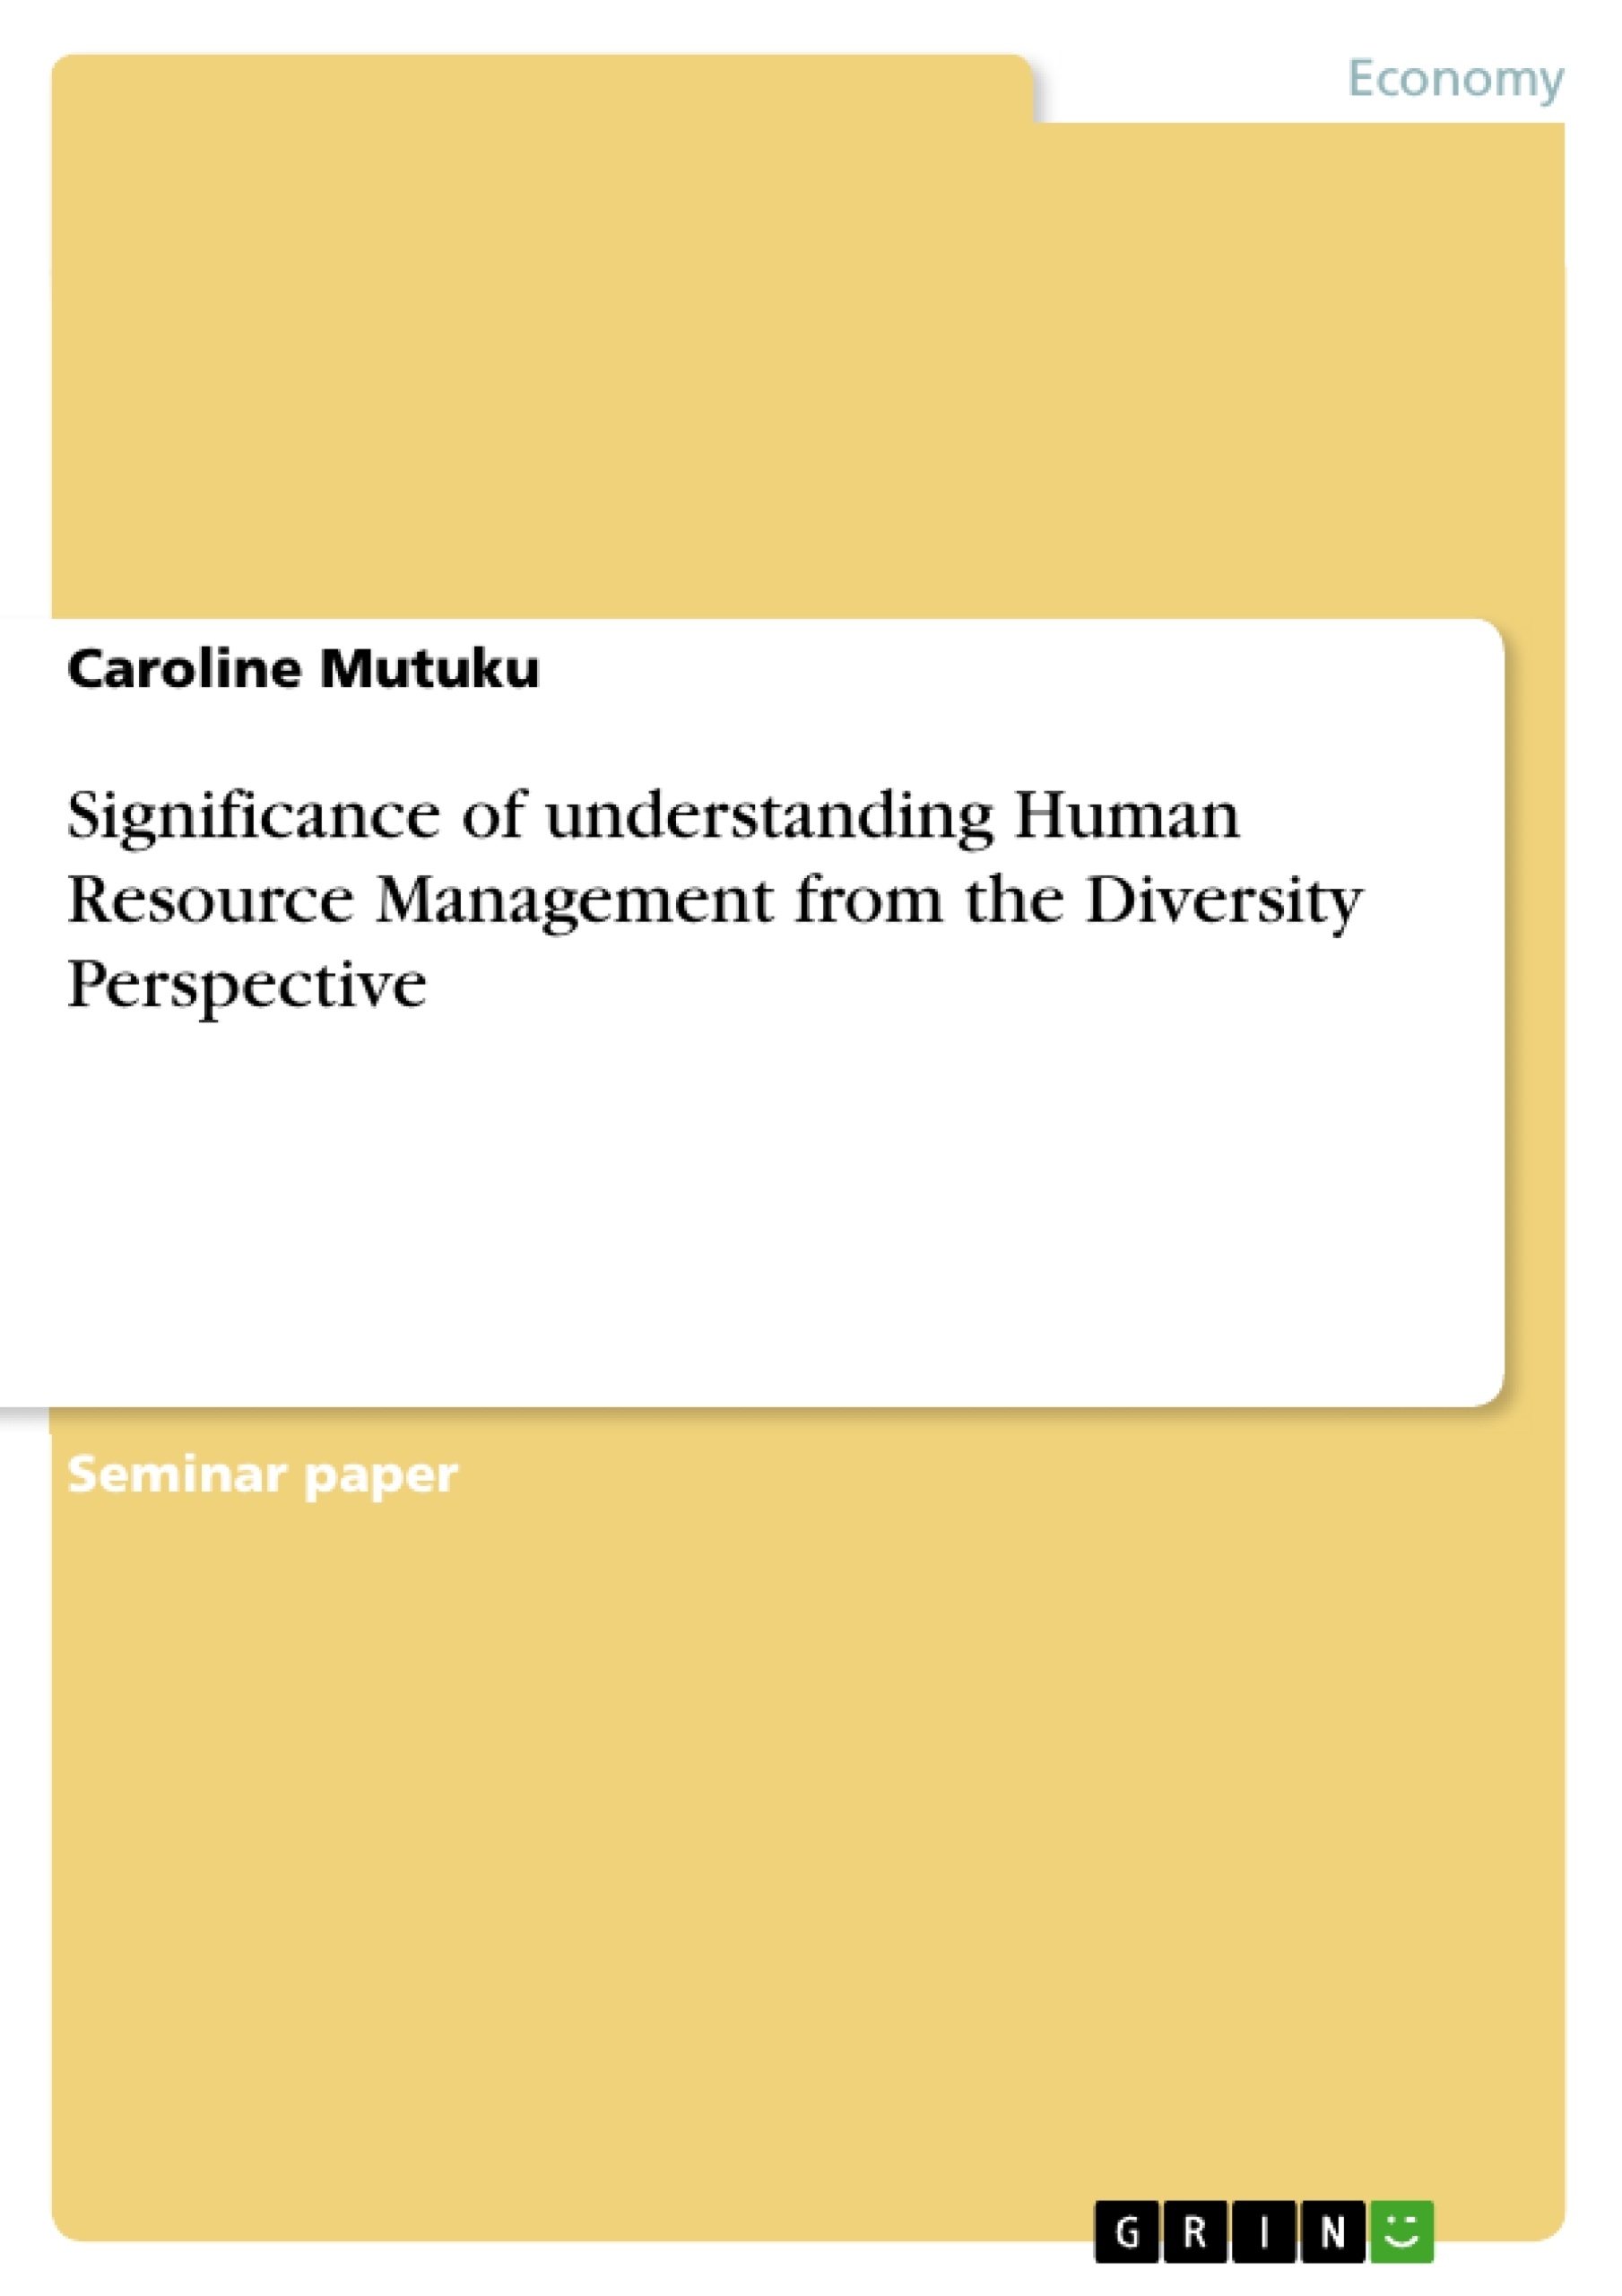 Titel: Significance of understanding Human Resource Management from the Diversity Perspective